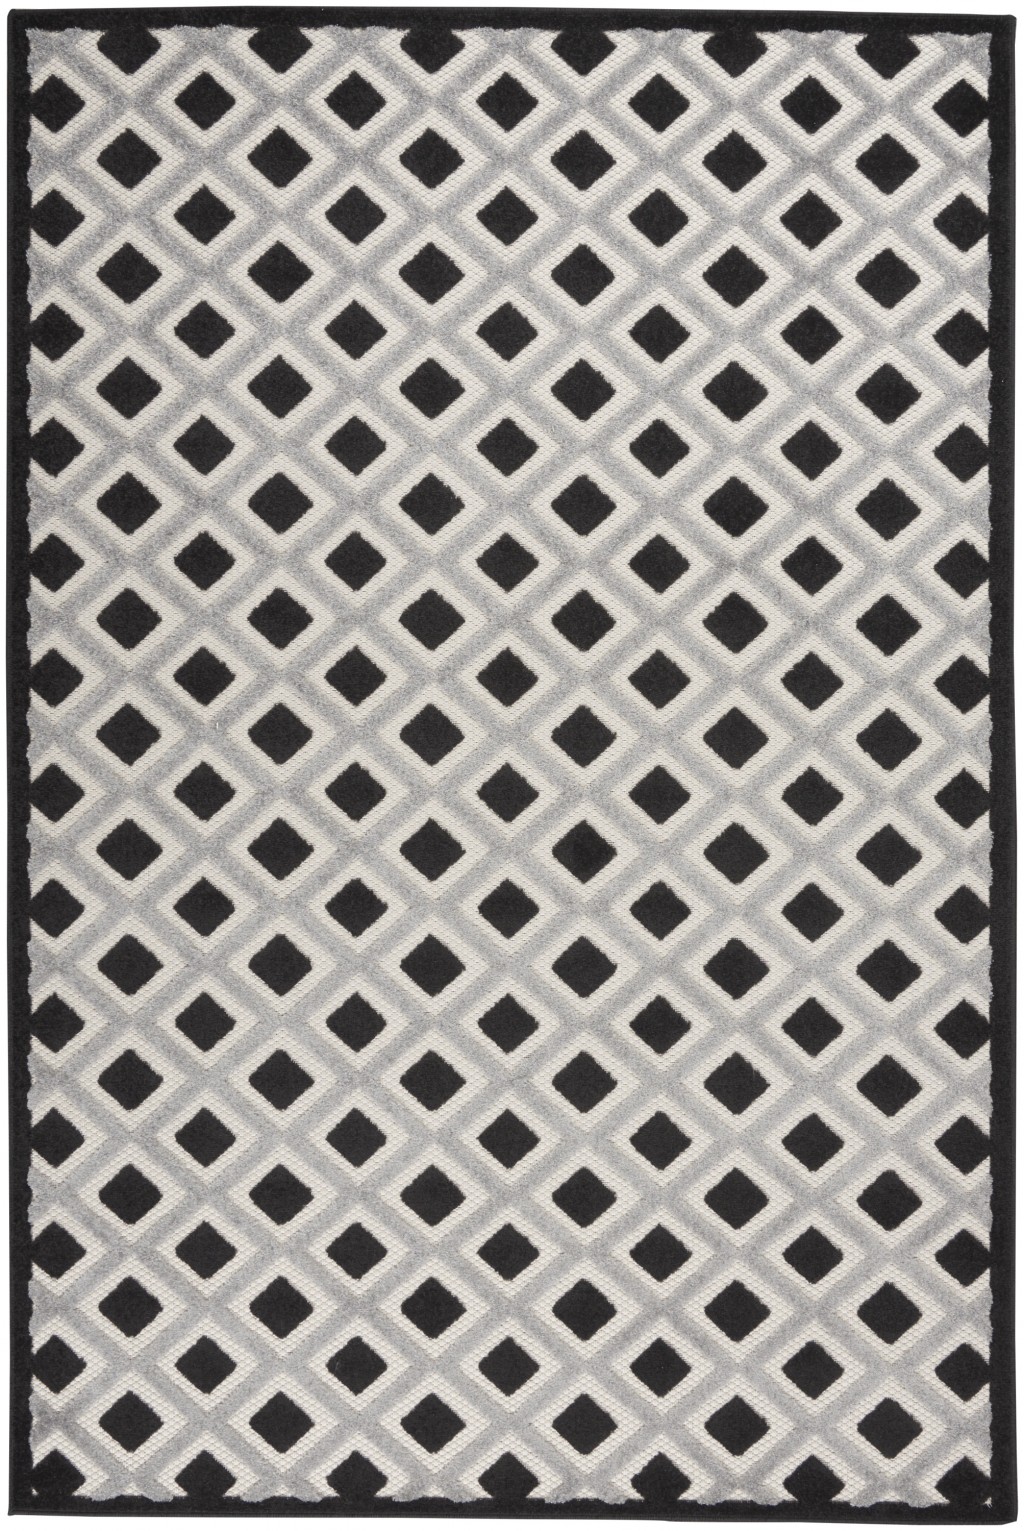 5' X 8' Black And White Geometric Indoor Outdoor Area Rug-385138-1